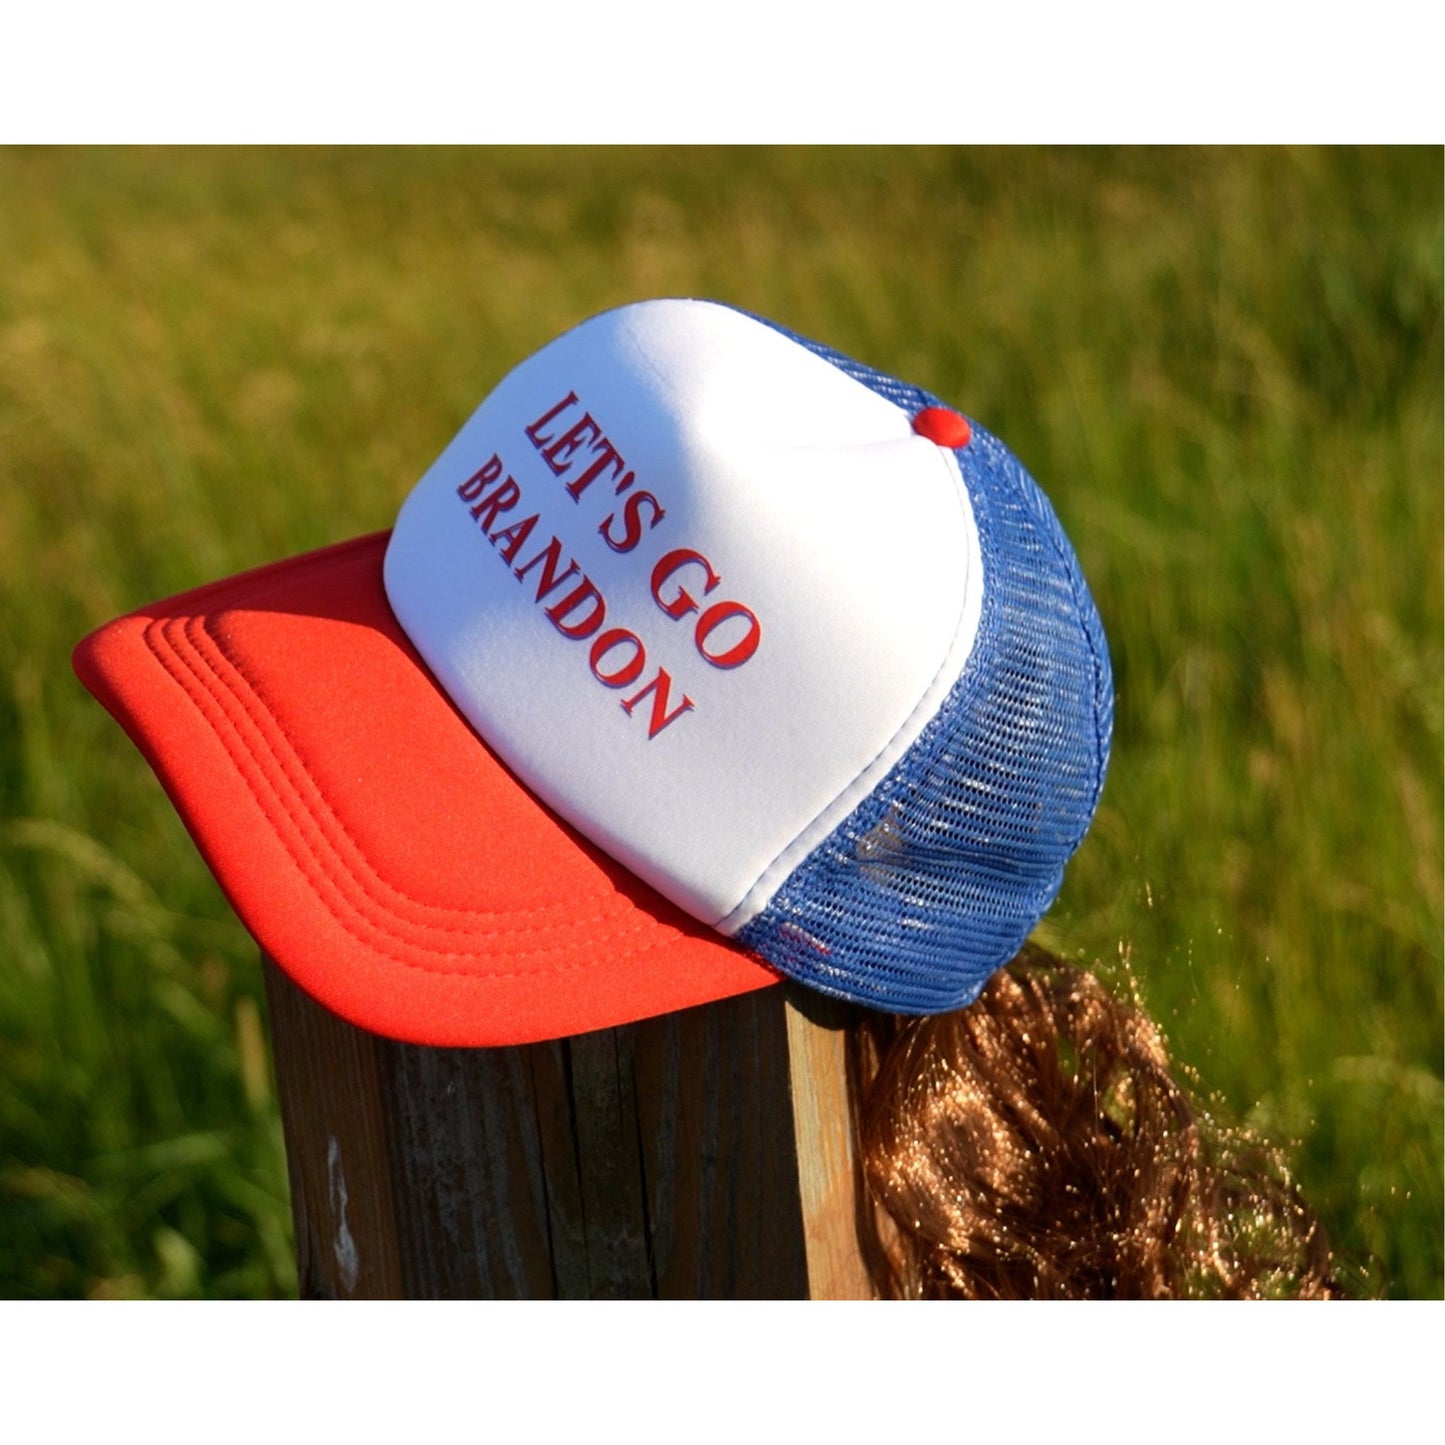 Let’s Go Brandon USA Hat with Mullet Wig